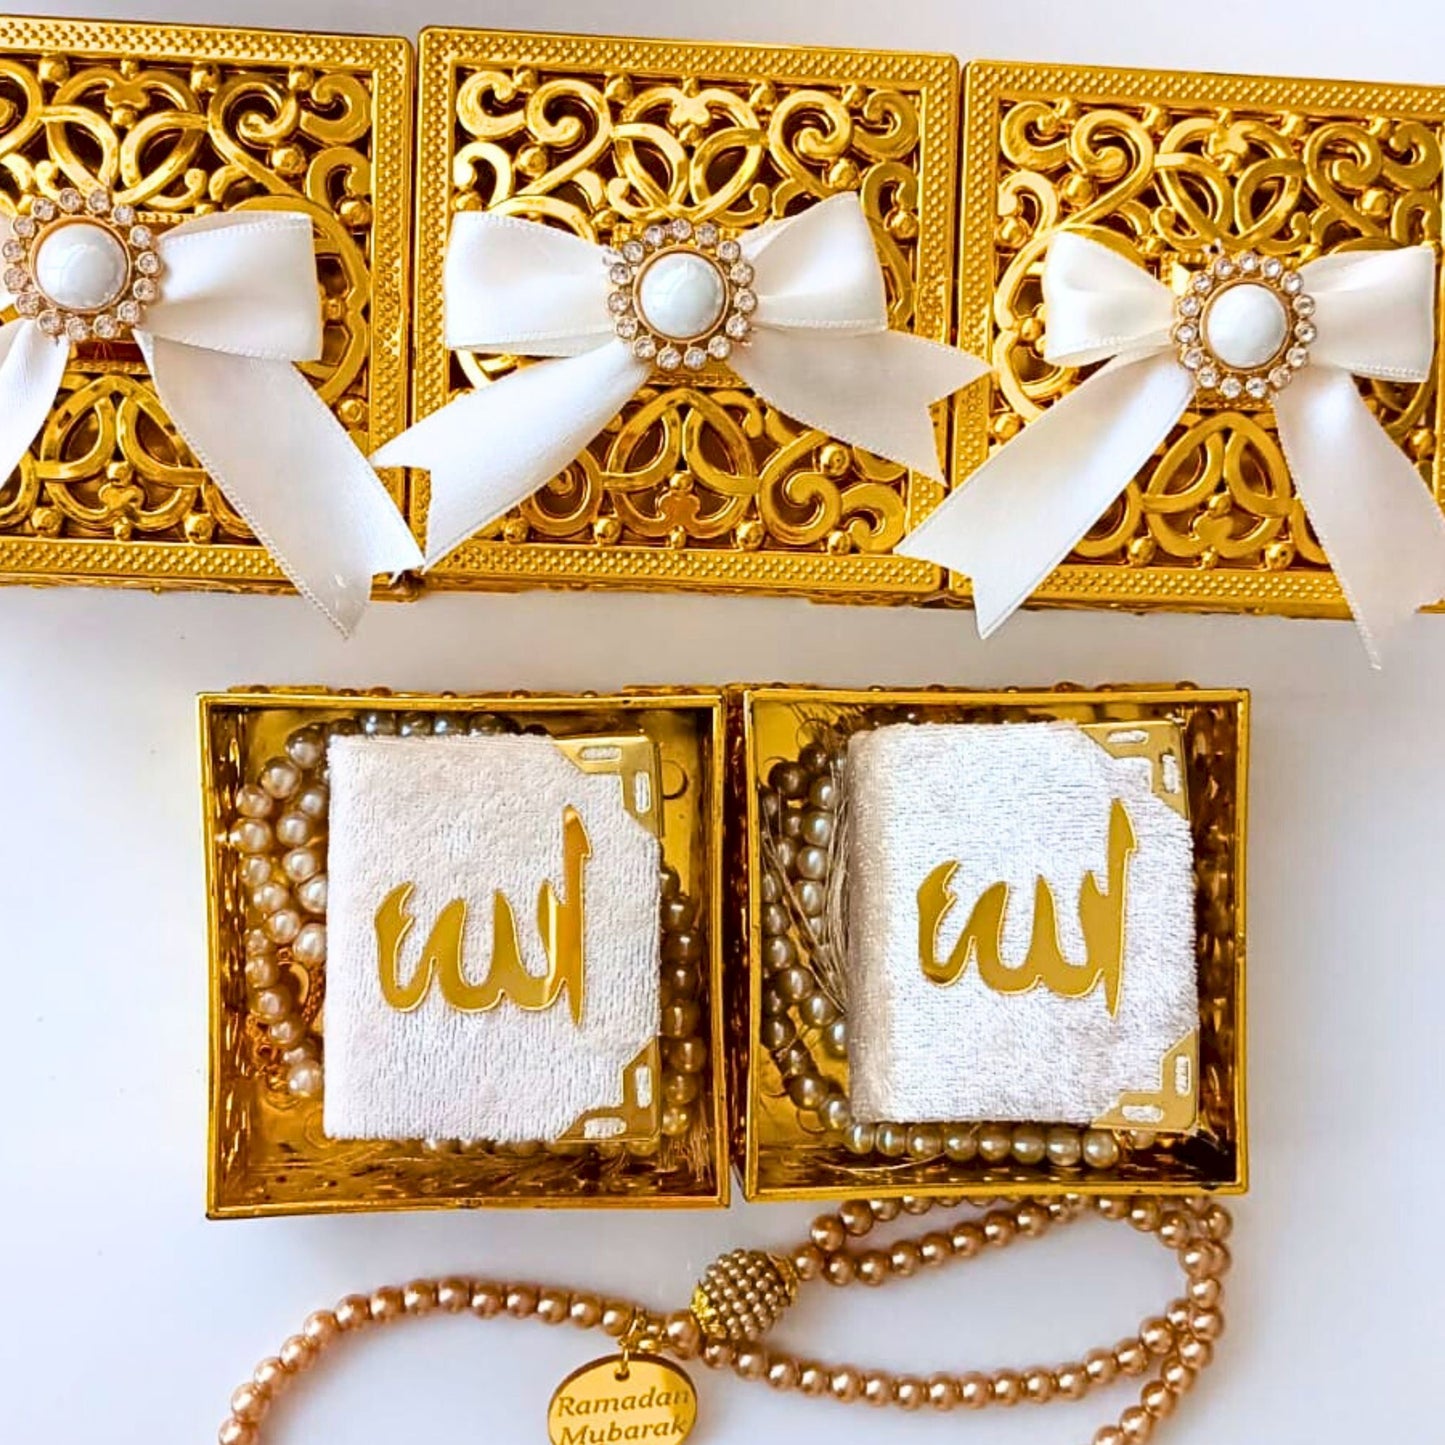 Personalized Wedding Favor Stylish Mini Quran Tasbeeh Set Pearl Decor - Islamic Elite Favors is a handmade gift shop offering a wide variety of unique and personalized gifts for all occasions. Whether you're looking for the perfect Ramadan, Eid, Hajj, wedding gift or something special for a birthday, baby shower or anniversary, we have something for everyone. High quality, made with love.